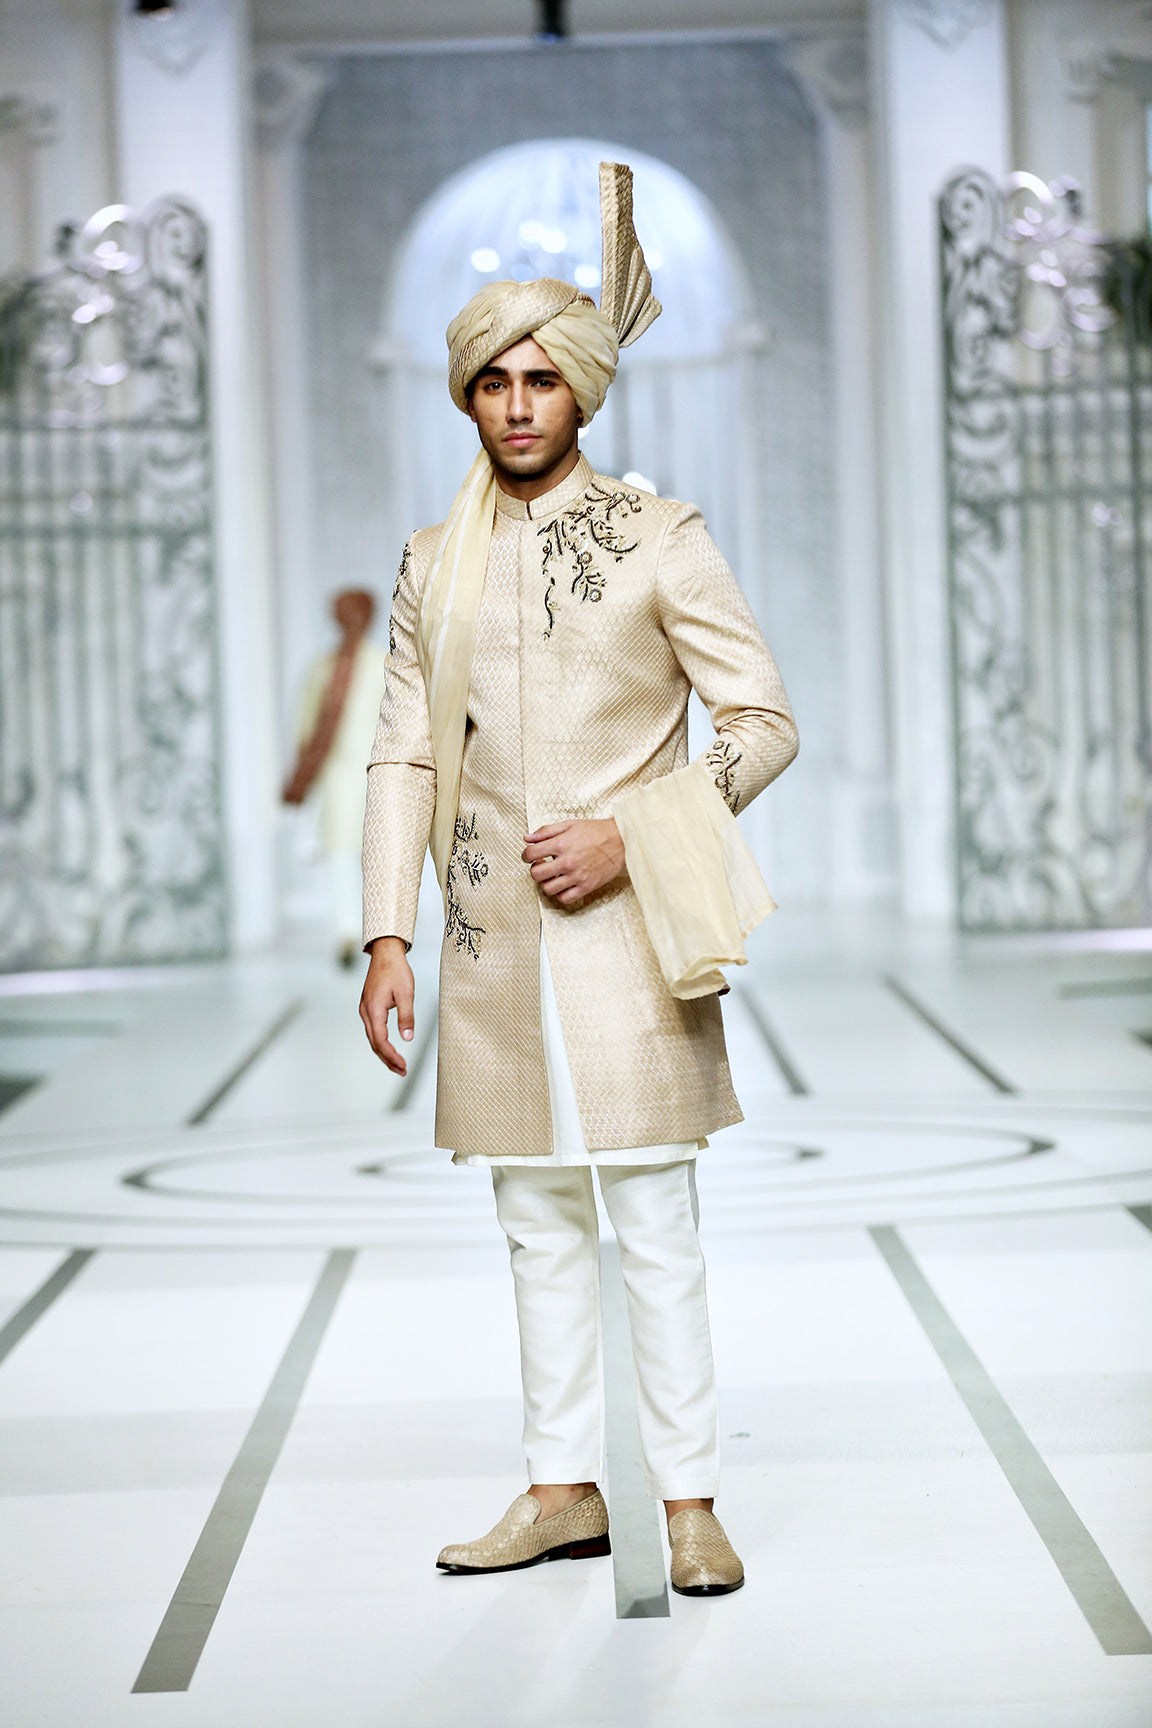 BCW 34: Handcrafted Banarsi Sherwani with Criss Cross Pattern - Elegant and Refined